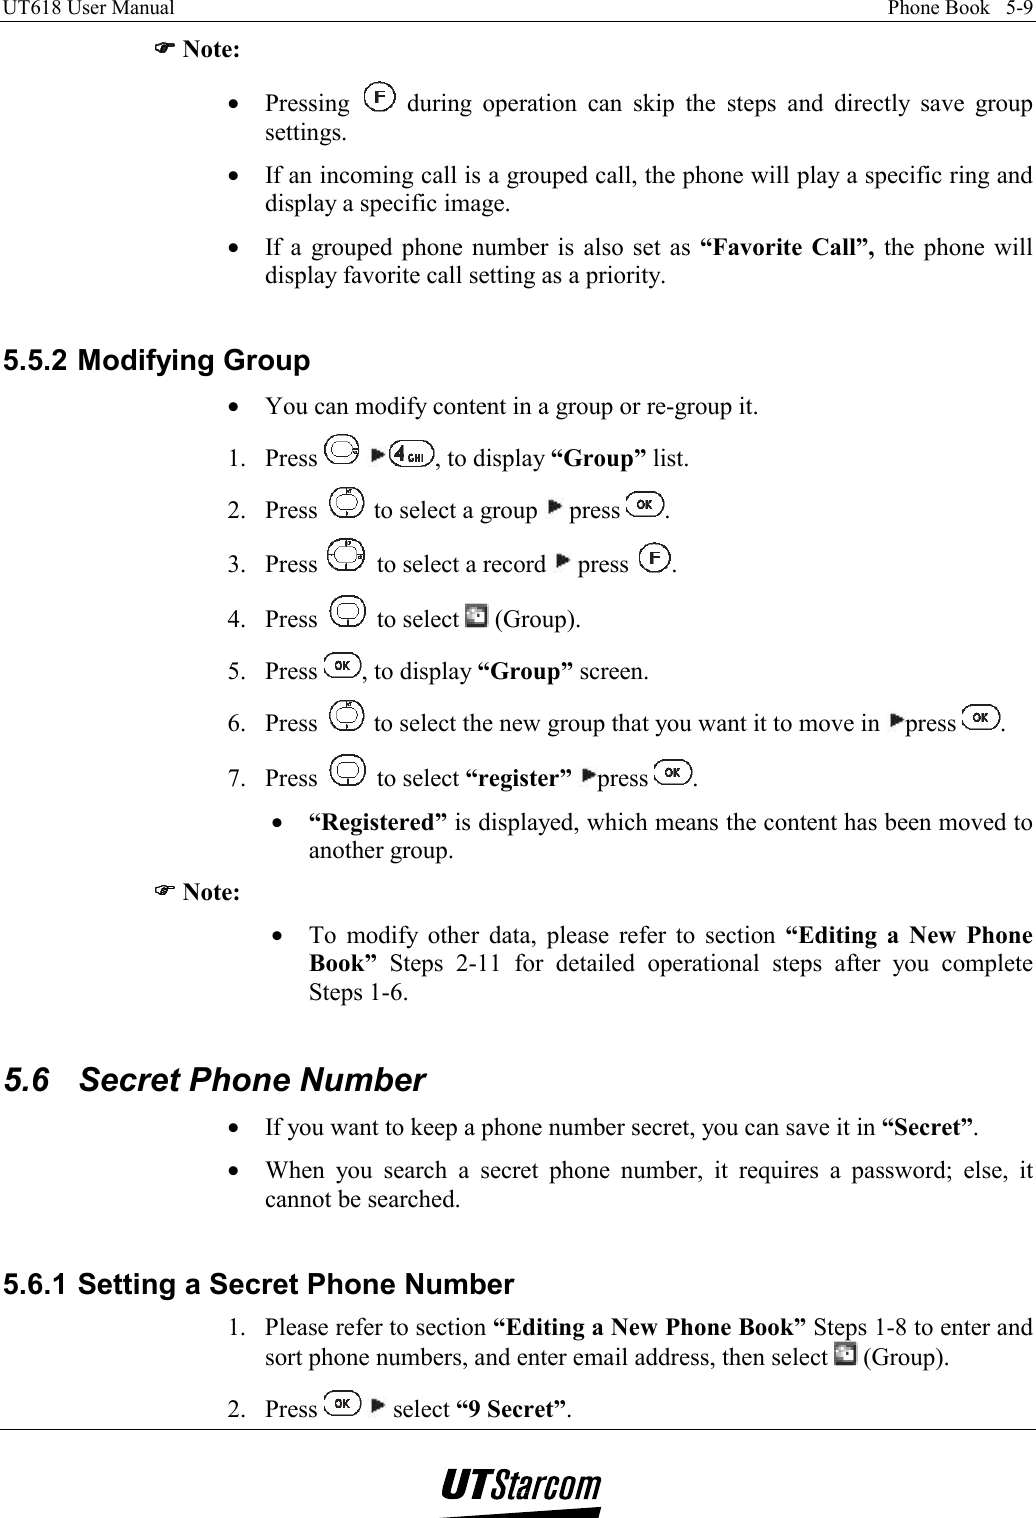 UT618 User Manual    Phone Book   5-9   )))) Note: •  Pressing   during operation can skip the steps and directly save group settings. •  If an incoming call is a grouped call, the phone will play a specific ring and display a specific image. •  If a grouped phone number is also set as “Favorite Call”, the phone will display favorite call setting as a priority.  5.5.2 Modifying Group •  You can modify content in a group or re-group it. 1. Press   , to display “Group” list. 2. Press   to select a group   press  . 3. Press   to select a record   press  . 4. Press   to select   (Group). 5. Press  , to display “Group” screen. 6. Press   to select the new group that you want it to move in  press  . 7. Press   to select “register” press  . •  “Registered” is displayed, which means the content has been moved to another group. )))) Note: •  To modify other data, please refer to section “Editing a New Phone Book” Steps 2-11 for detailed operational steps after you complete Steps 1-6.  5.6  Secret Phone Number •  If you want to keep a phone number secret, you can save it in “Secret”. •  When you search a secret phone number, it requires a password; else, it cannot be searched.  5.6.1 Setting a Secret Phone Number 1.  Please refer to section “Editing a New Phone Book” Steps 1-8 to enter and sort phone numbers, and enter email address, then select   (Group). 2. Press    select “9 Secret”. 